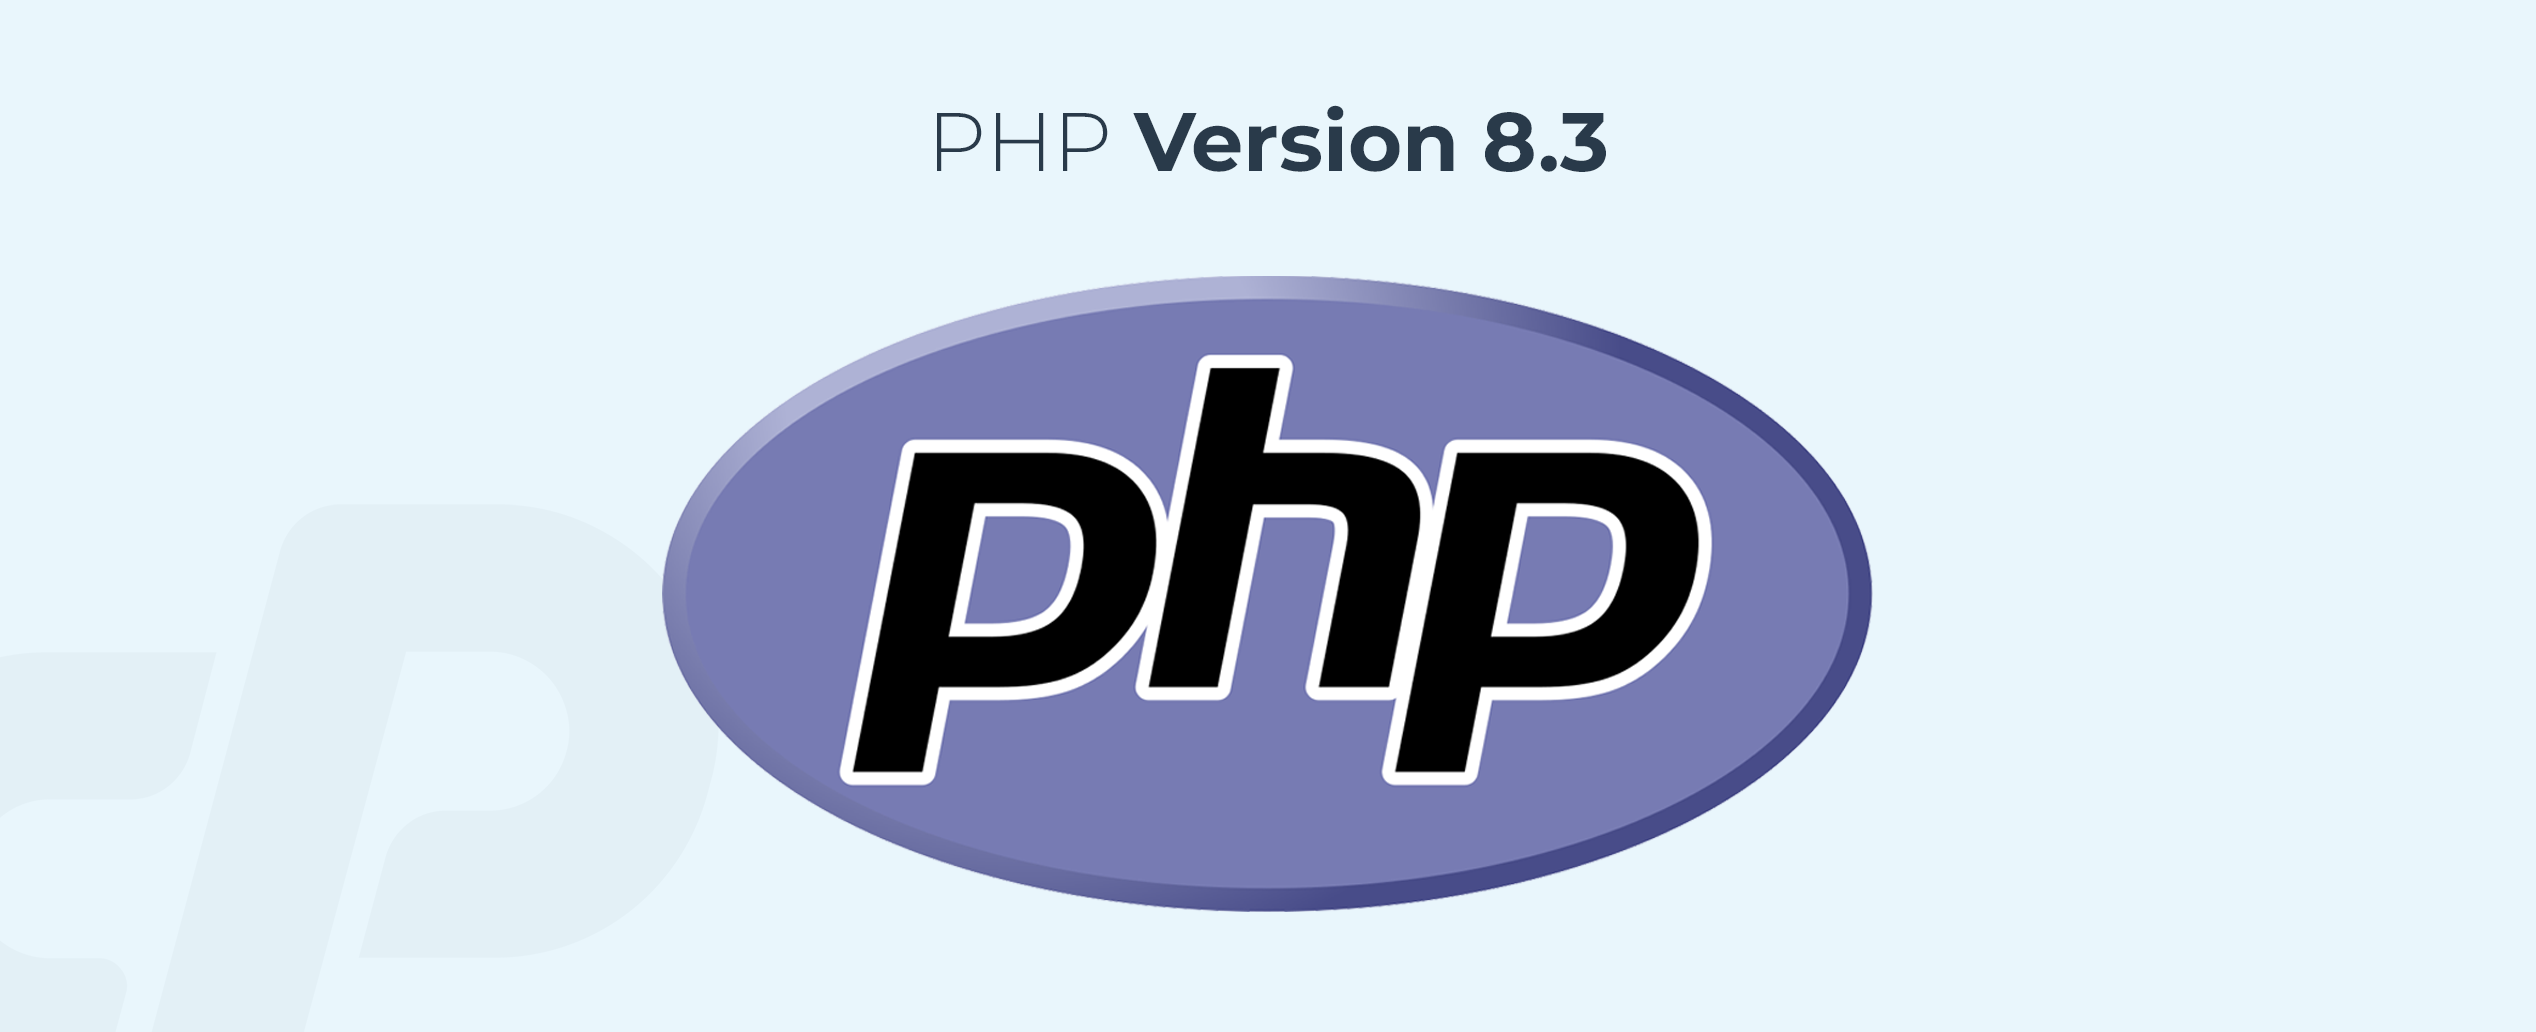 PHP 8.0 Reaches End of Life, Support for PHP 8.3 Announced 